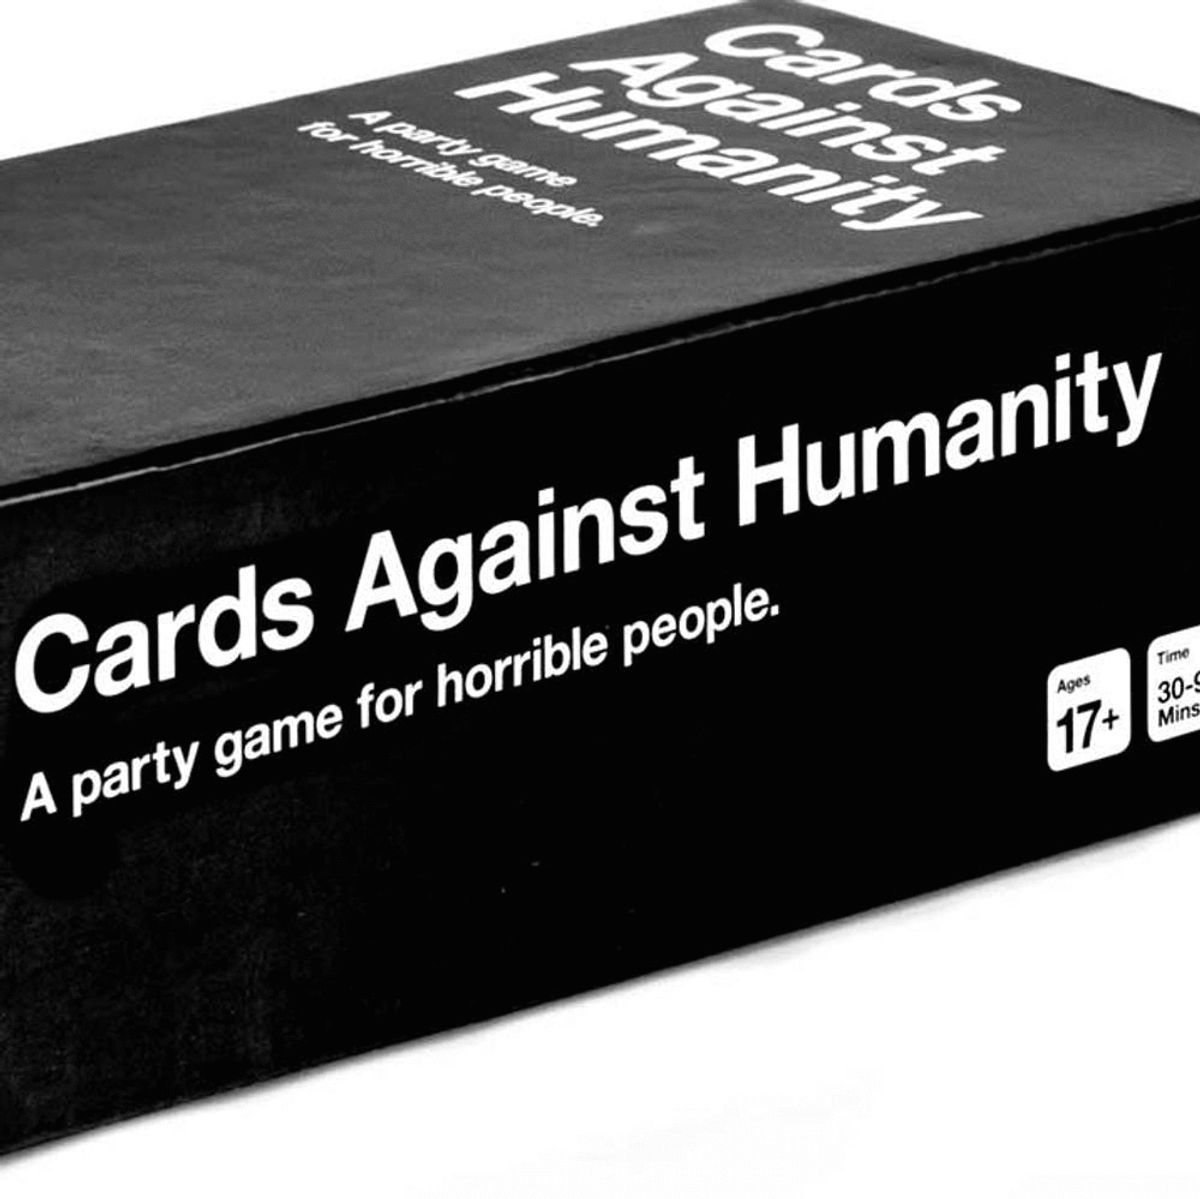 Cards Against Humanity Bought Land on the US-Mexico Border to Halt Trump’s Wall